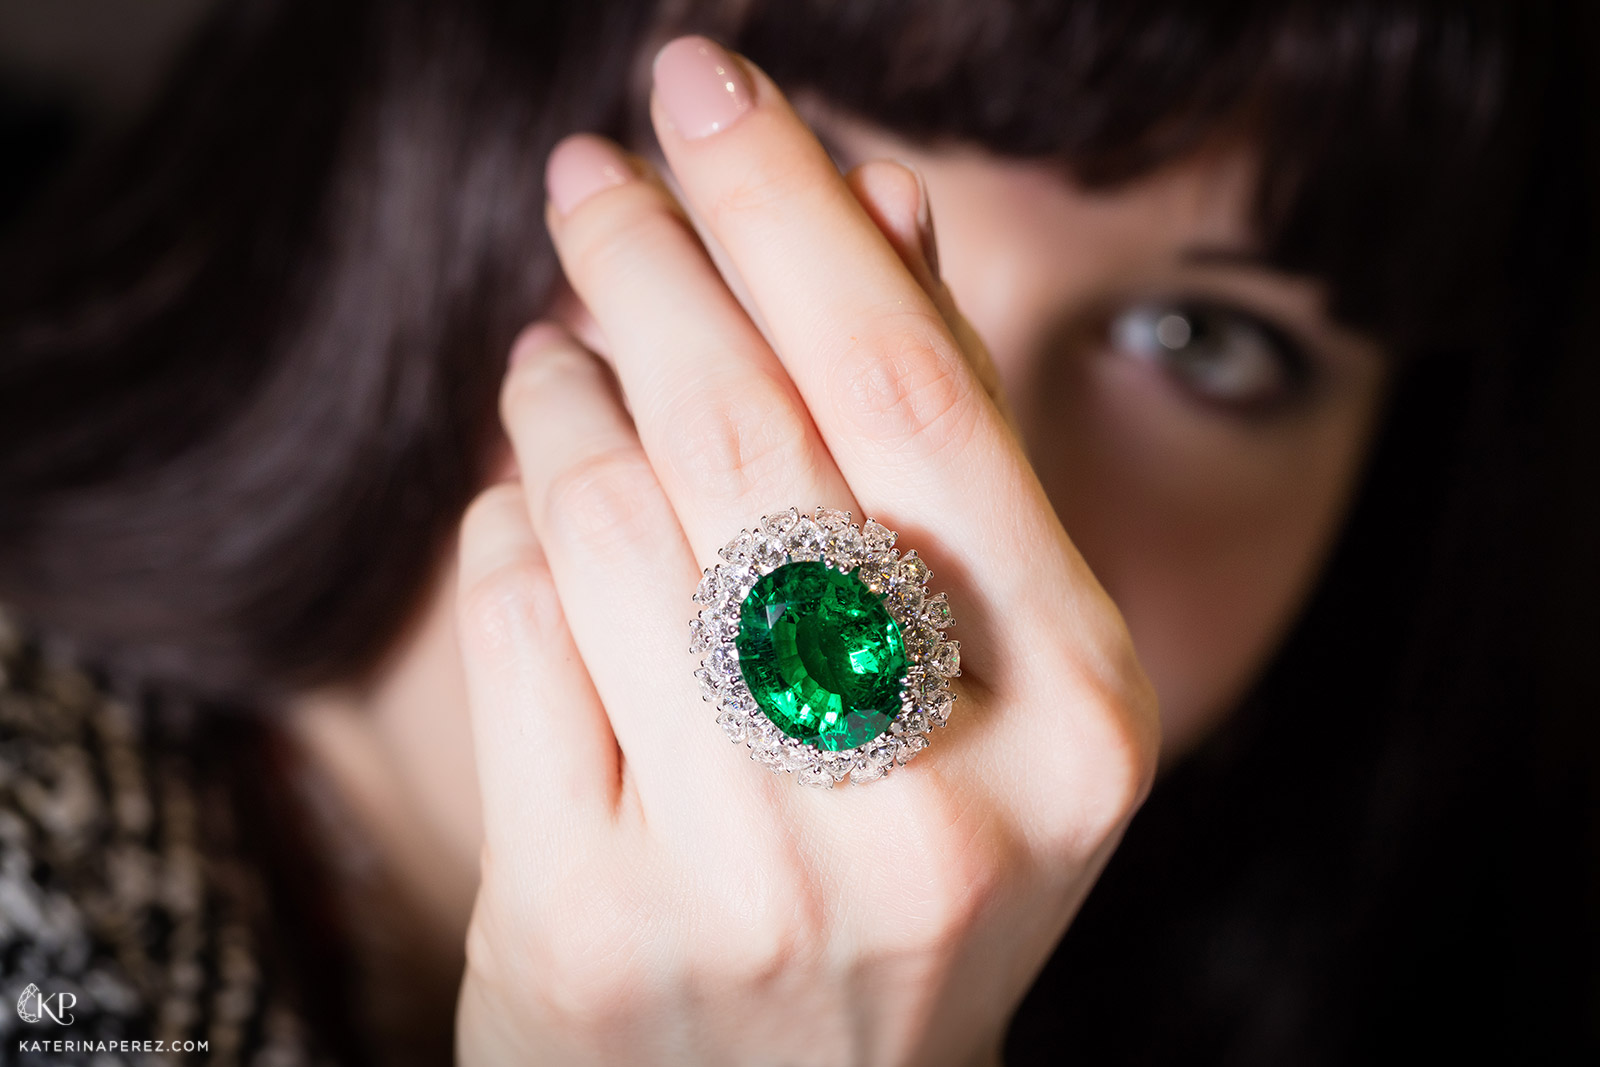 Picchiotti bombé ring with 19ct Zambian emerald and pear cut diamonds